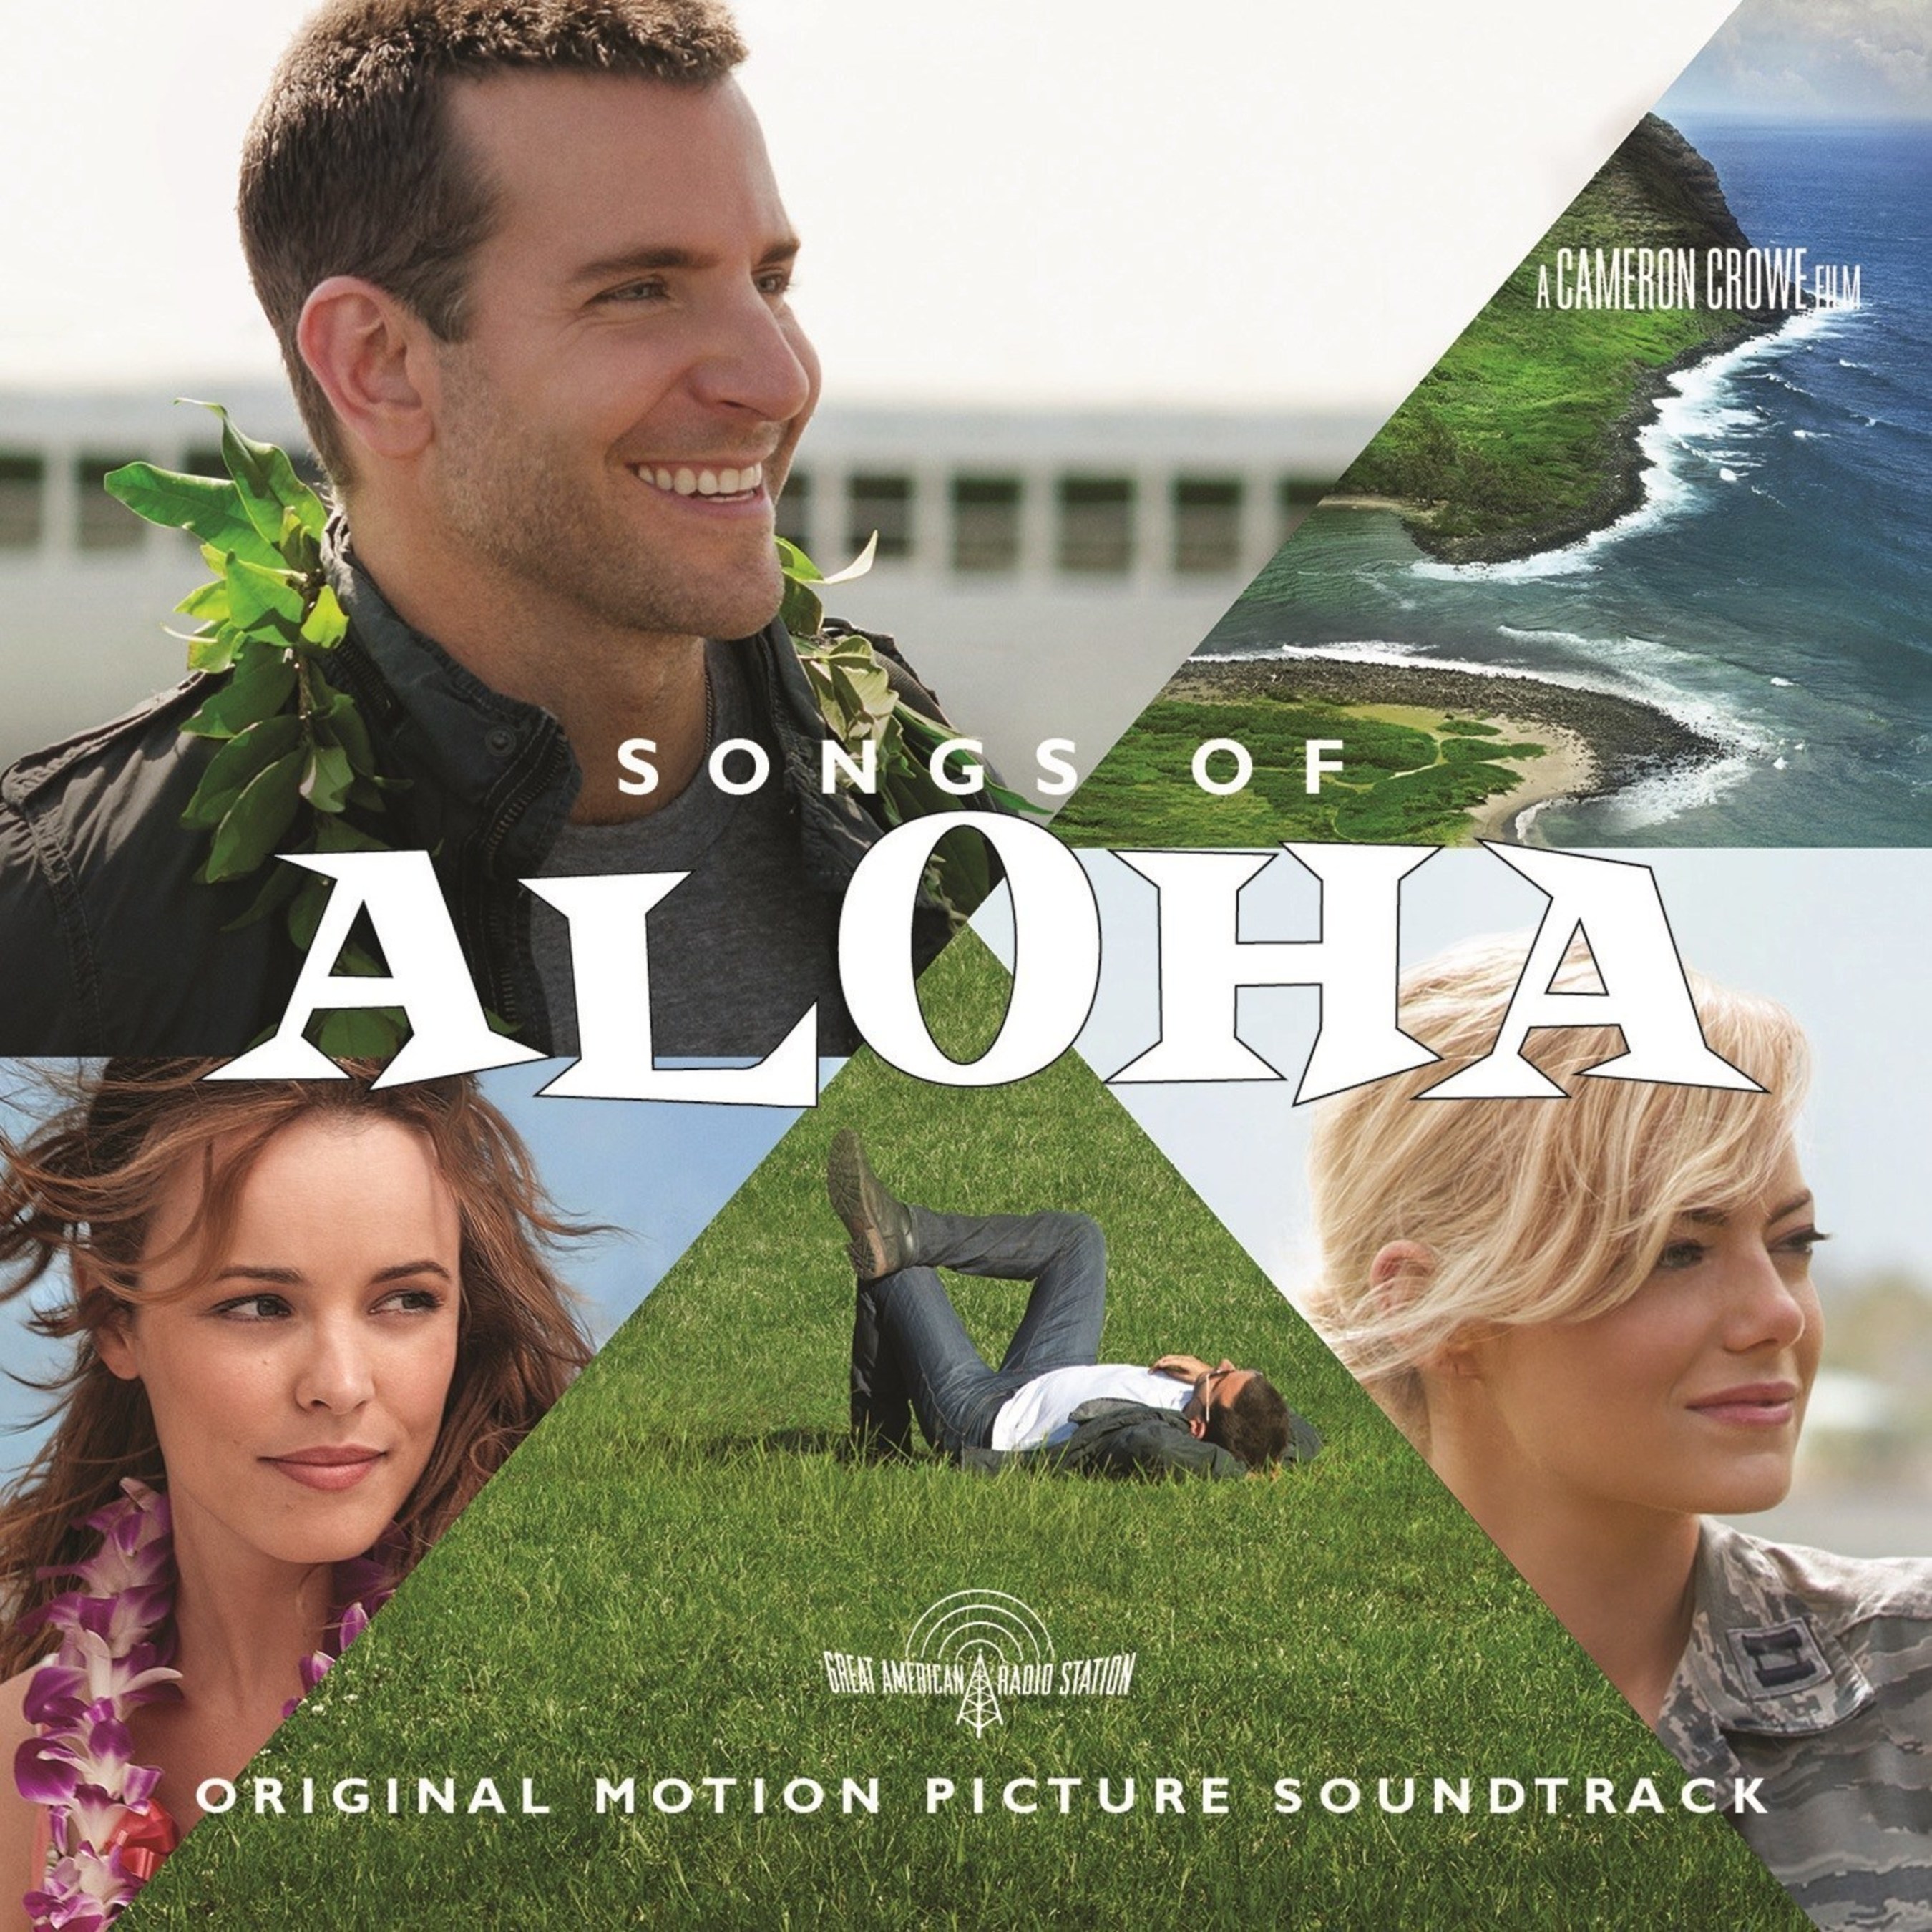 The soundtrack will arrive in stores and at all DSPs on May 26th; "Aloha" opens in theatres across North America on May 29th.